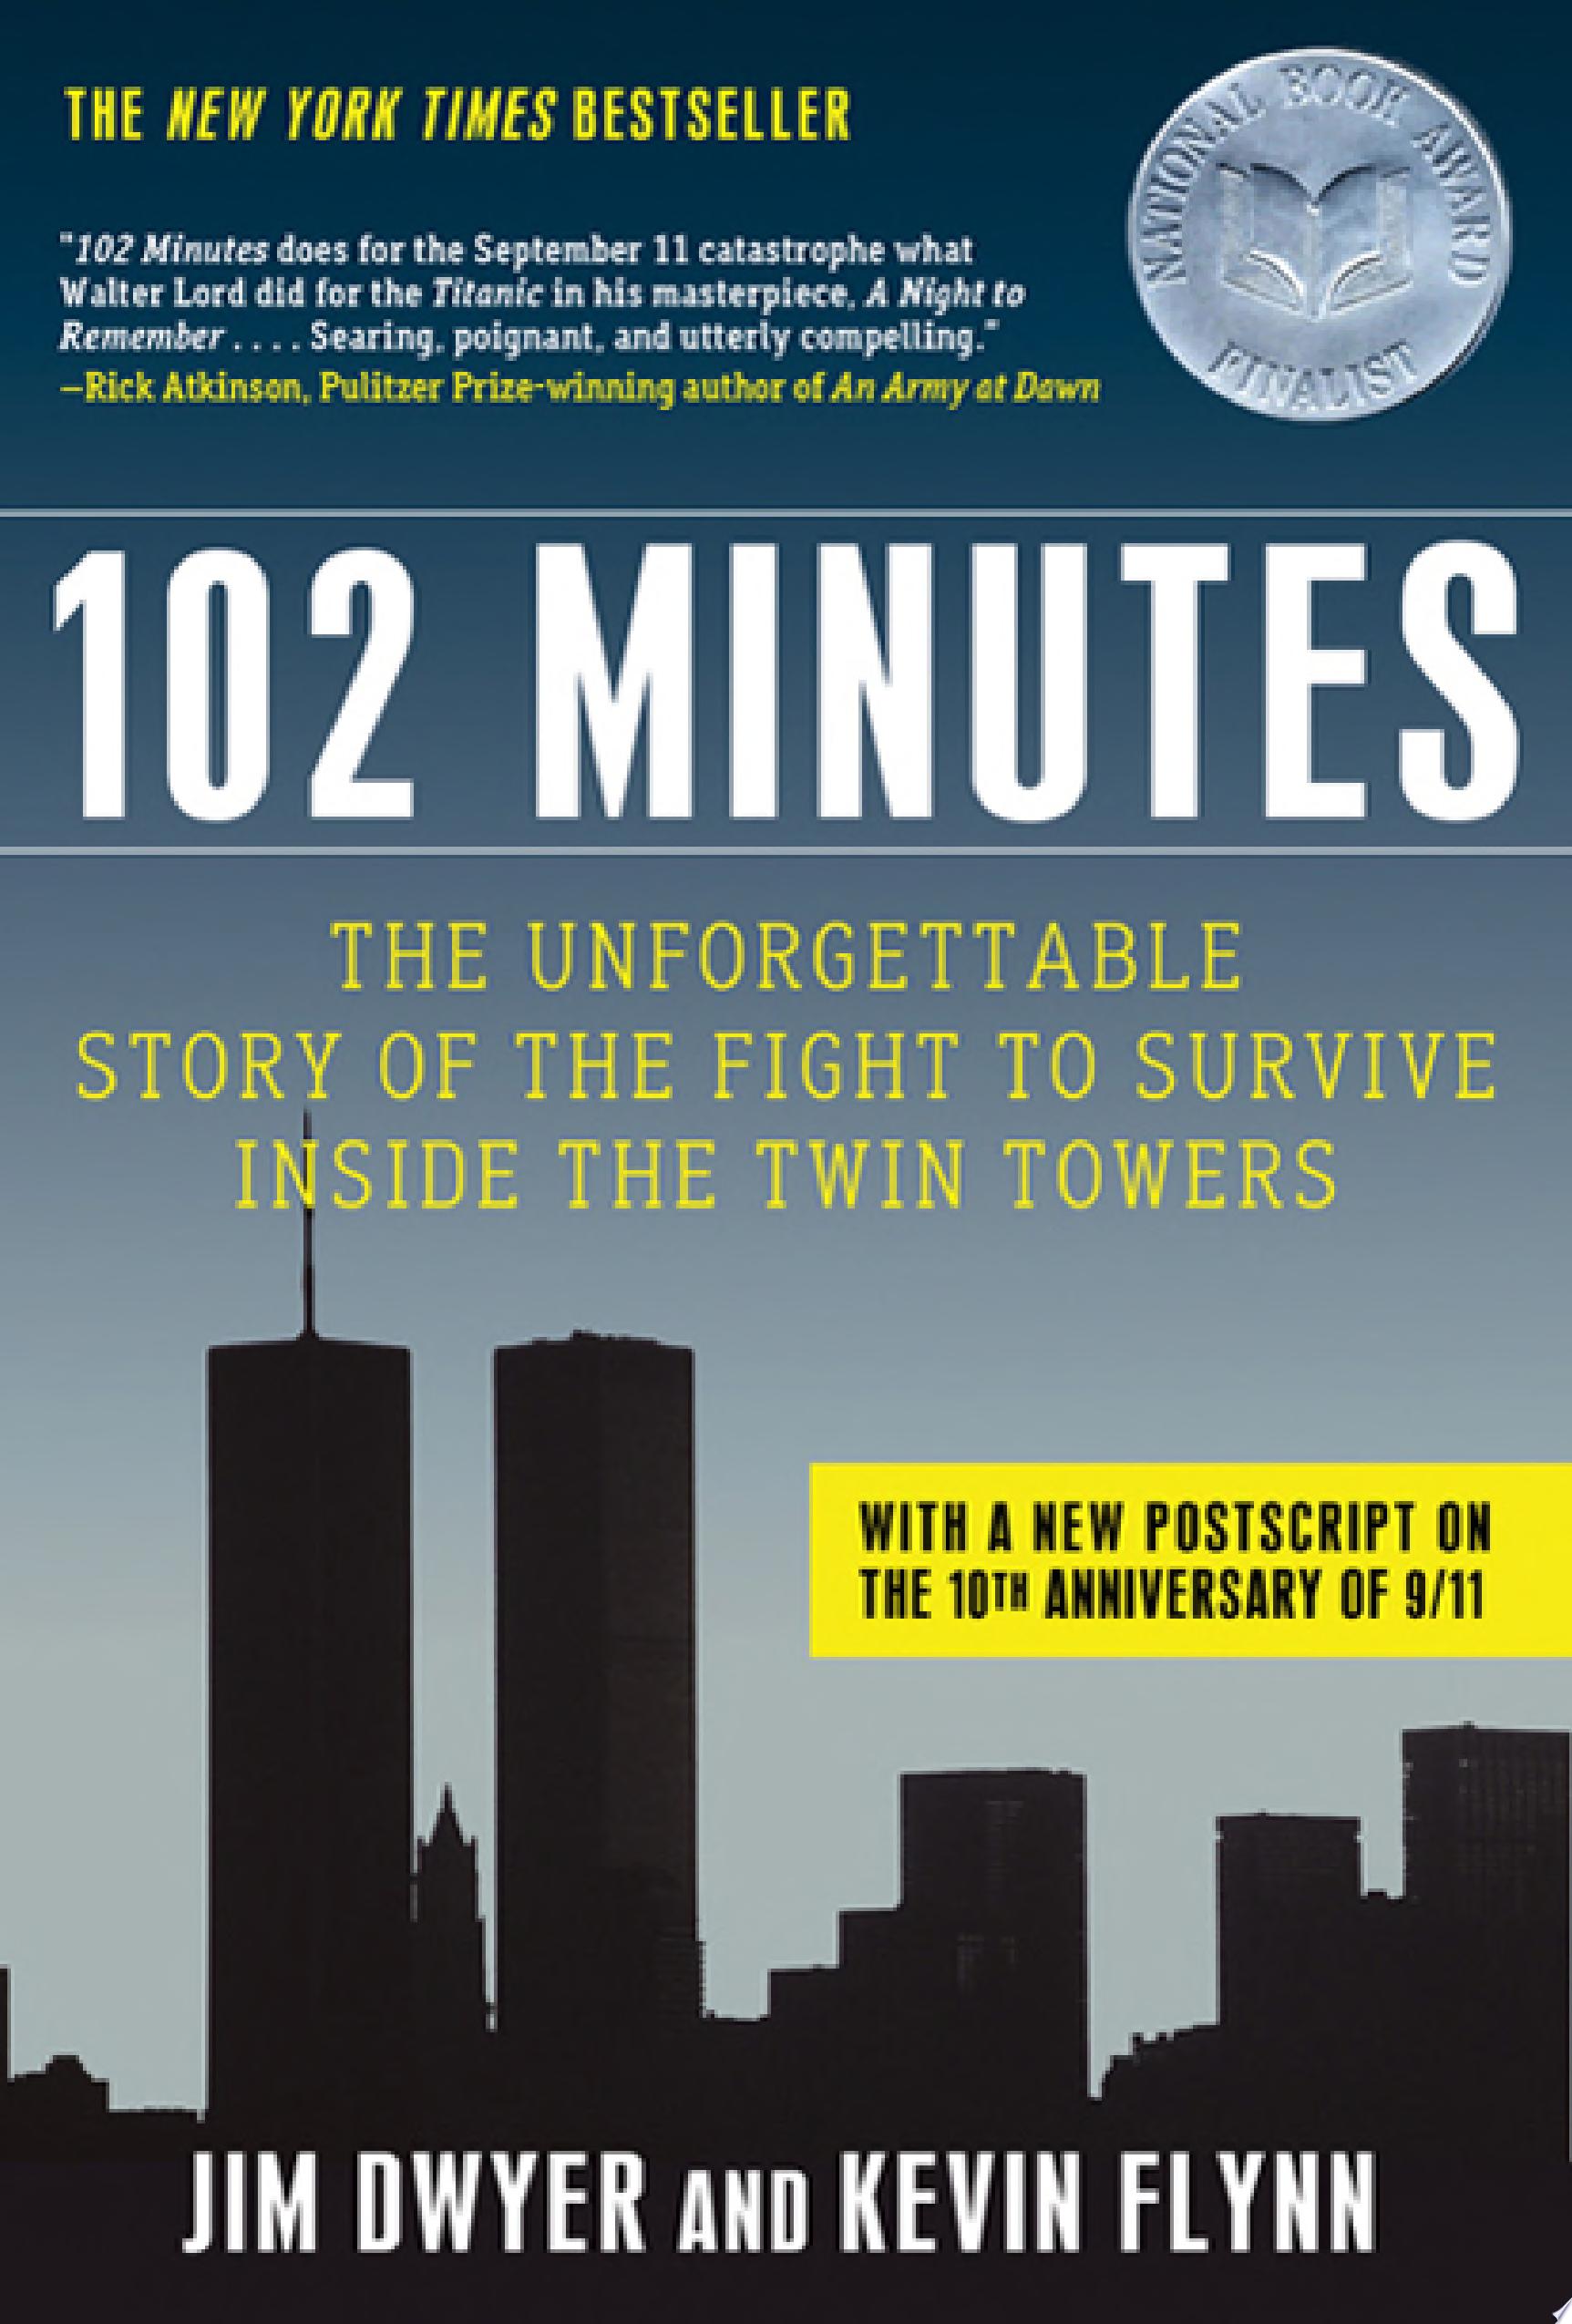 Image for "102 Minutes"